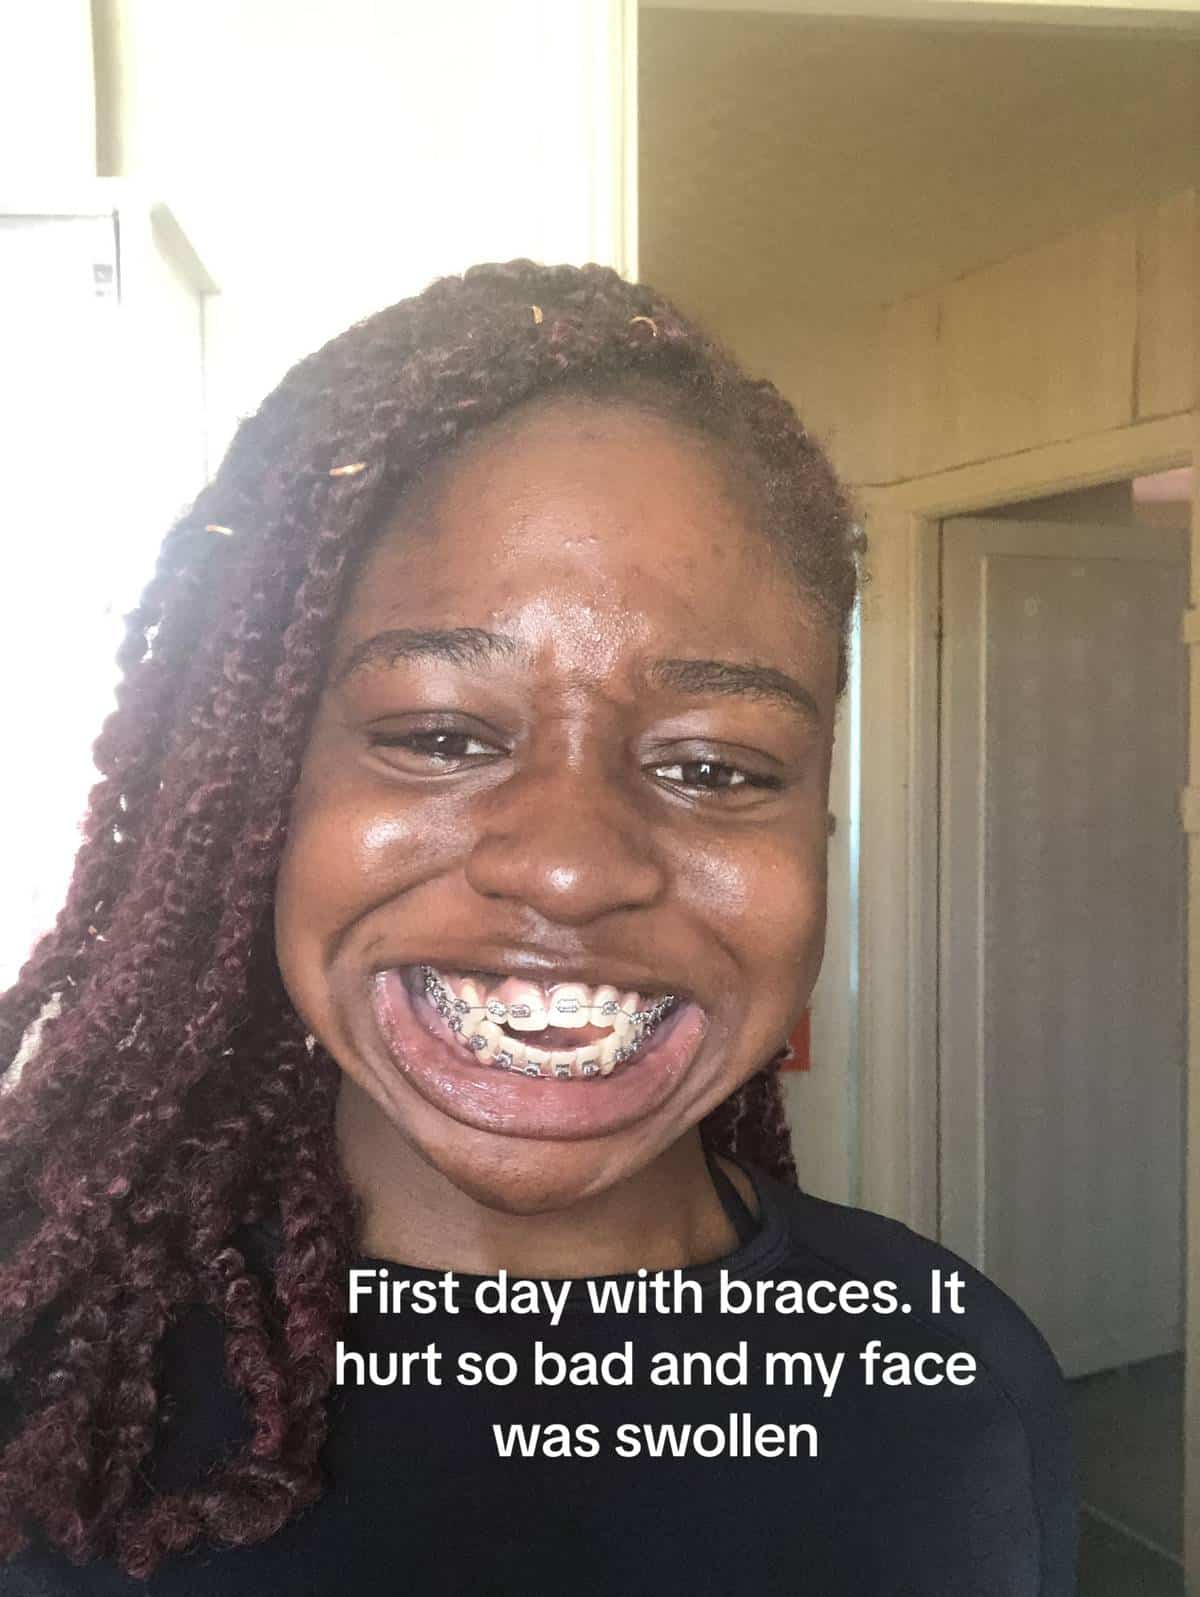 Lady shares beautiful result after wearing braces for five years